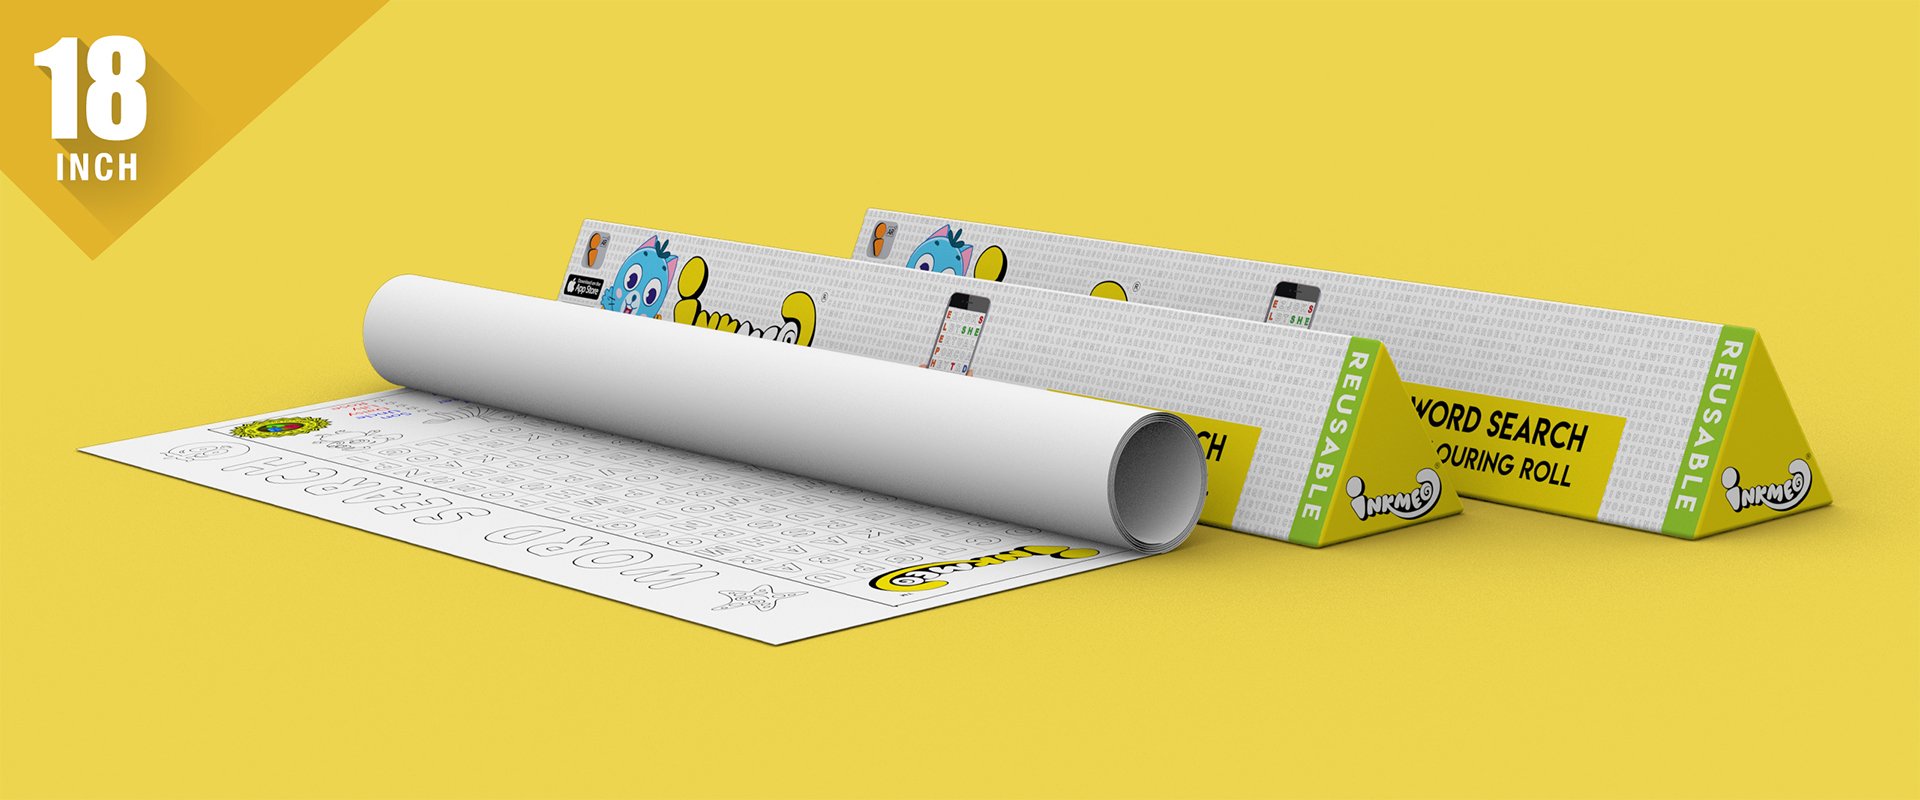 The image shows a yellow background with two triangular boxes, one of which has paper rolled out.